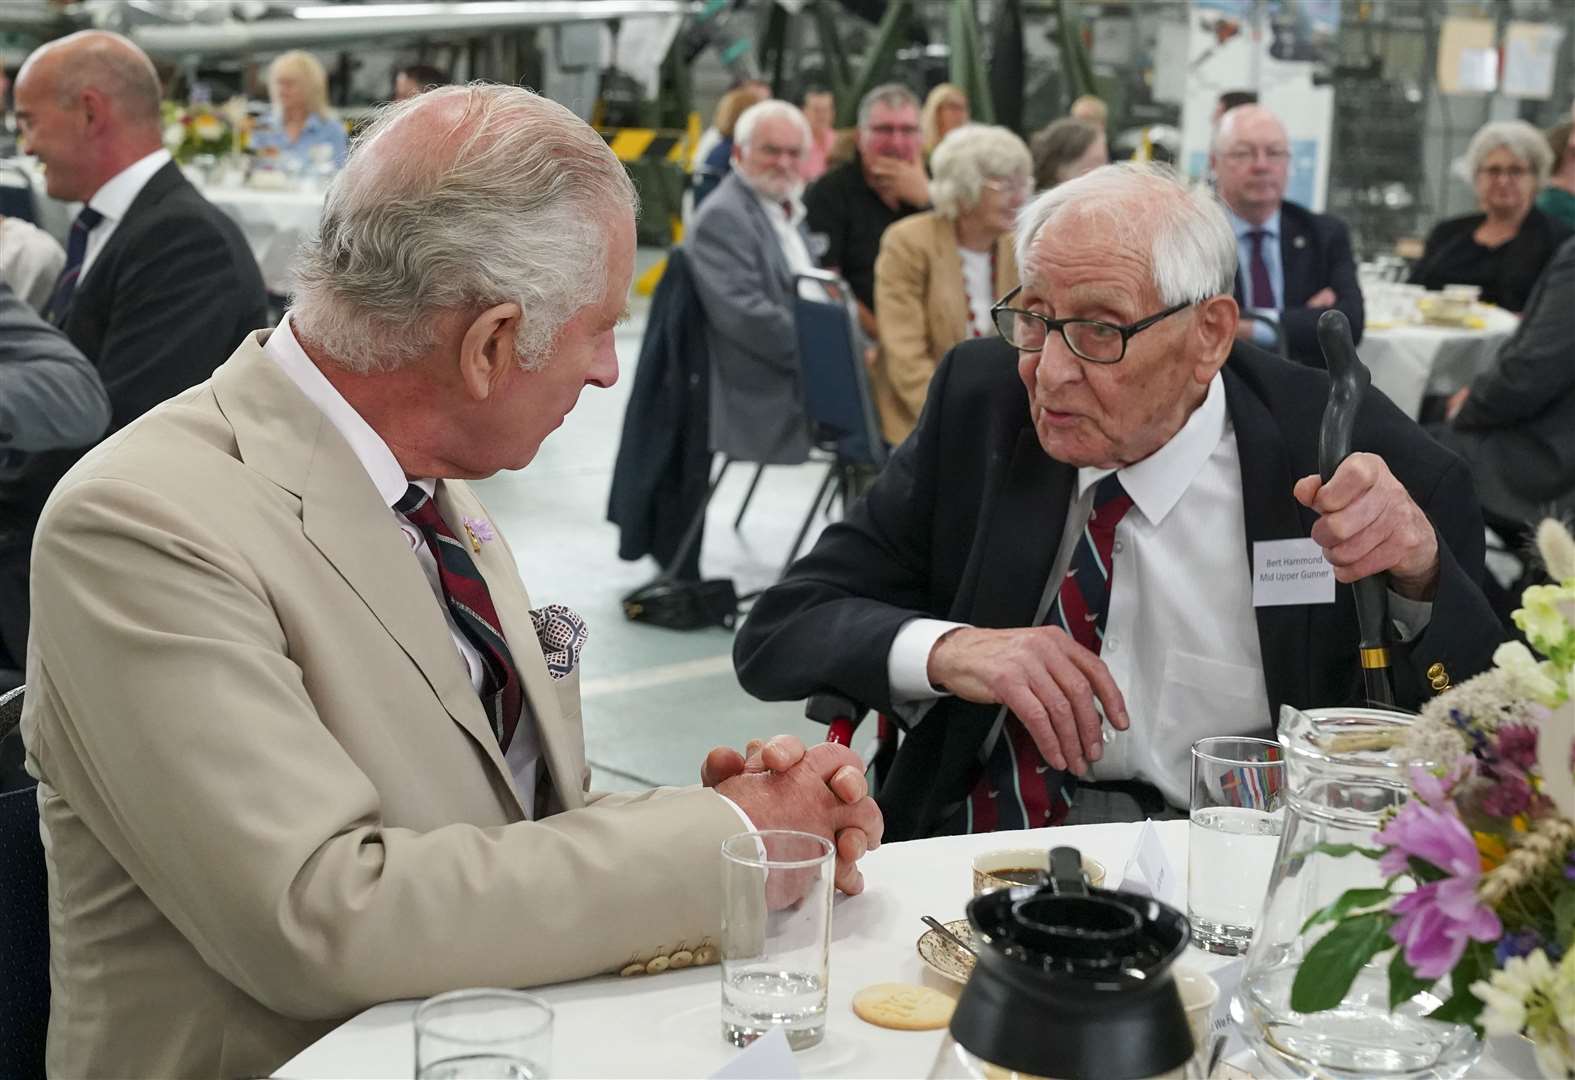 The King Charles speaks to veteran Burt Hammond during a visit to Coningsby, Lincolnshire (Arthur Edwards/The Sun/PA)